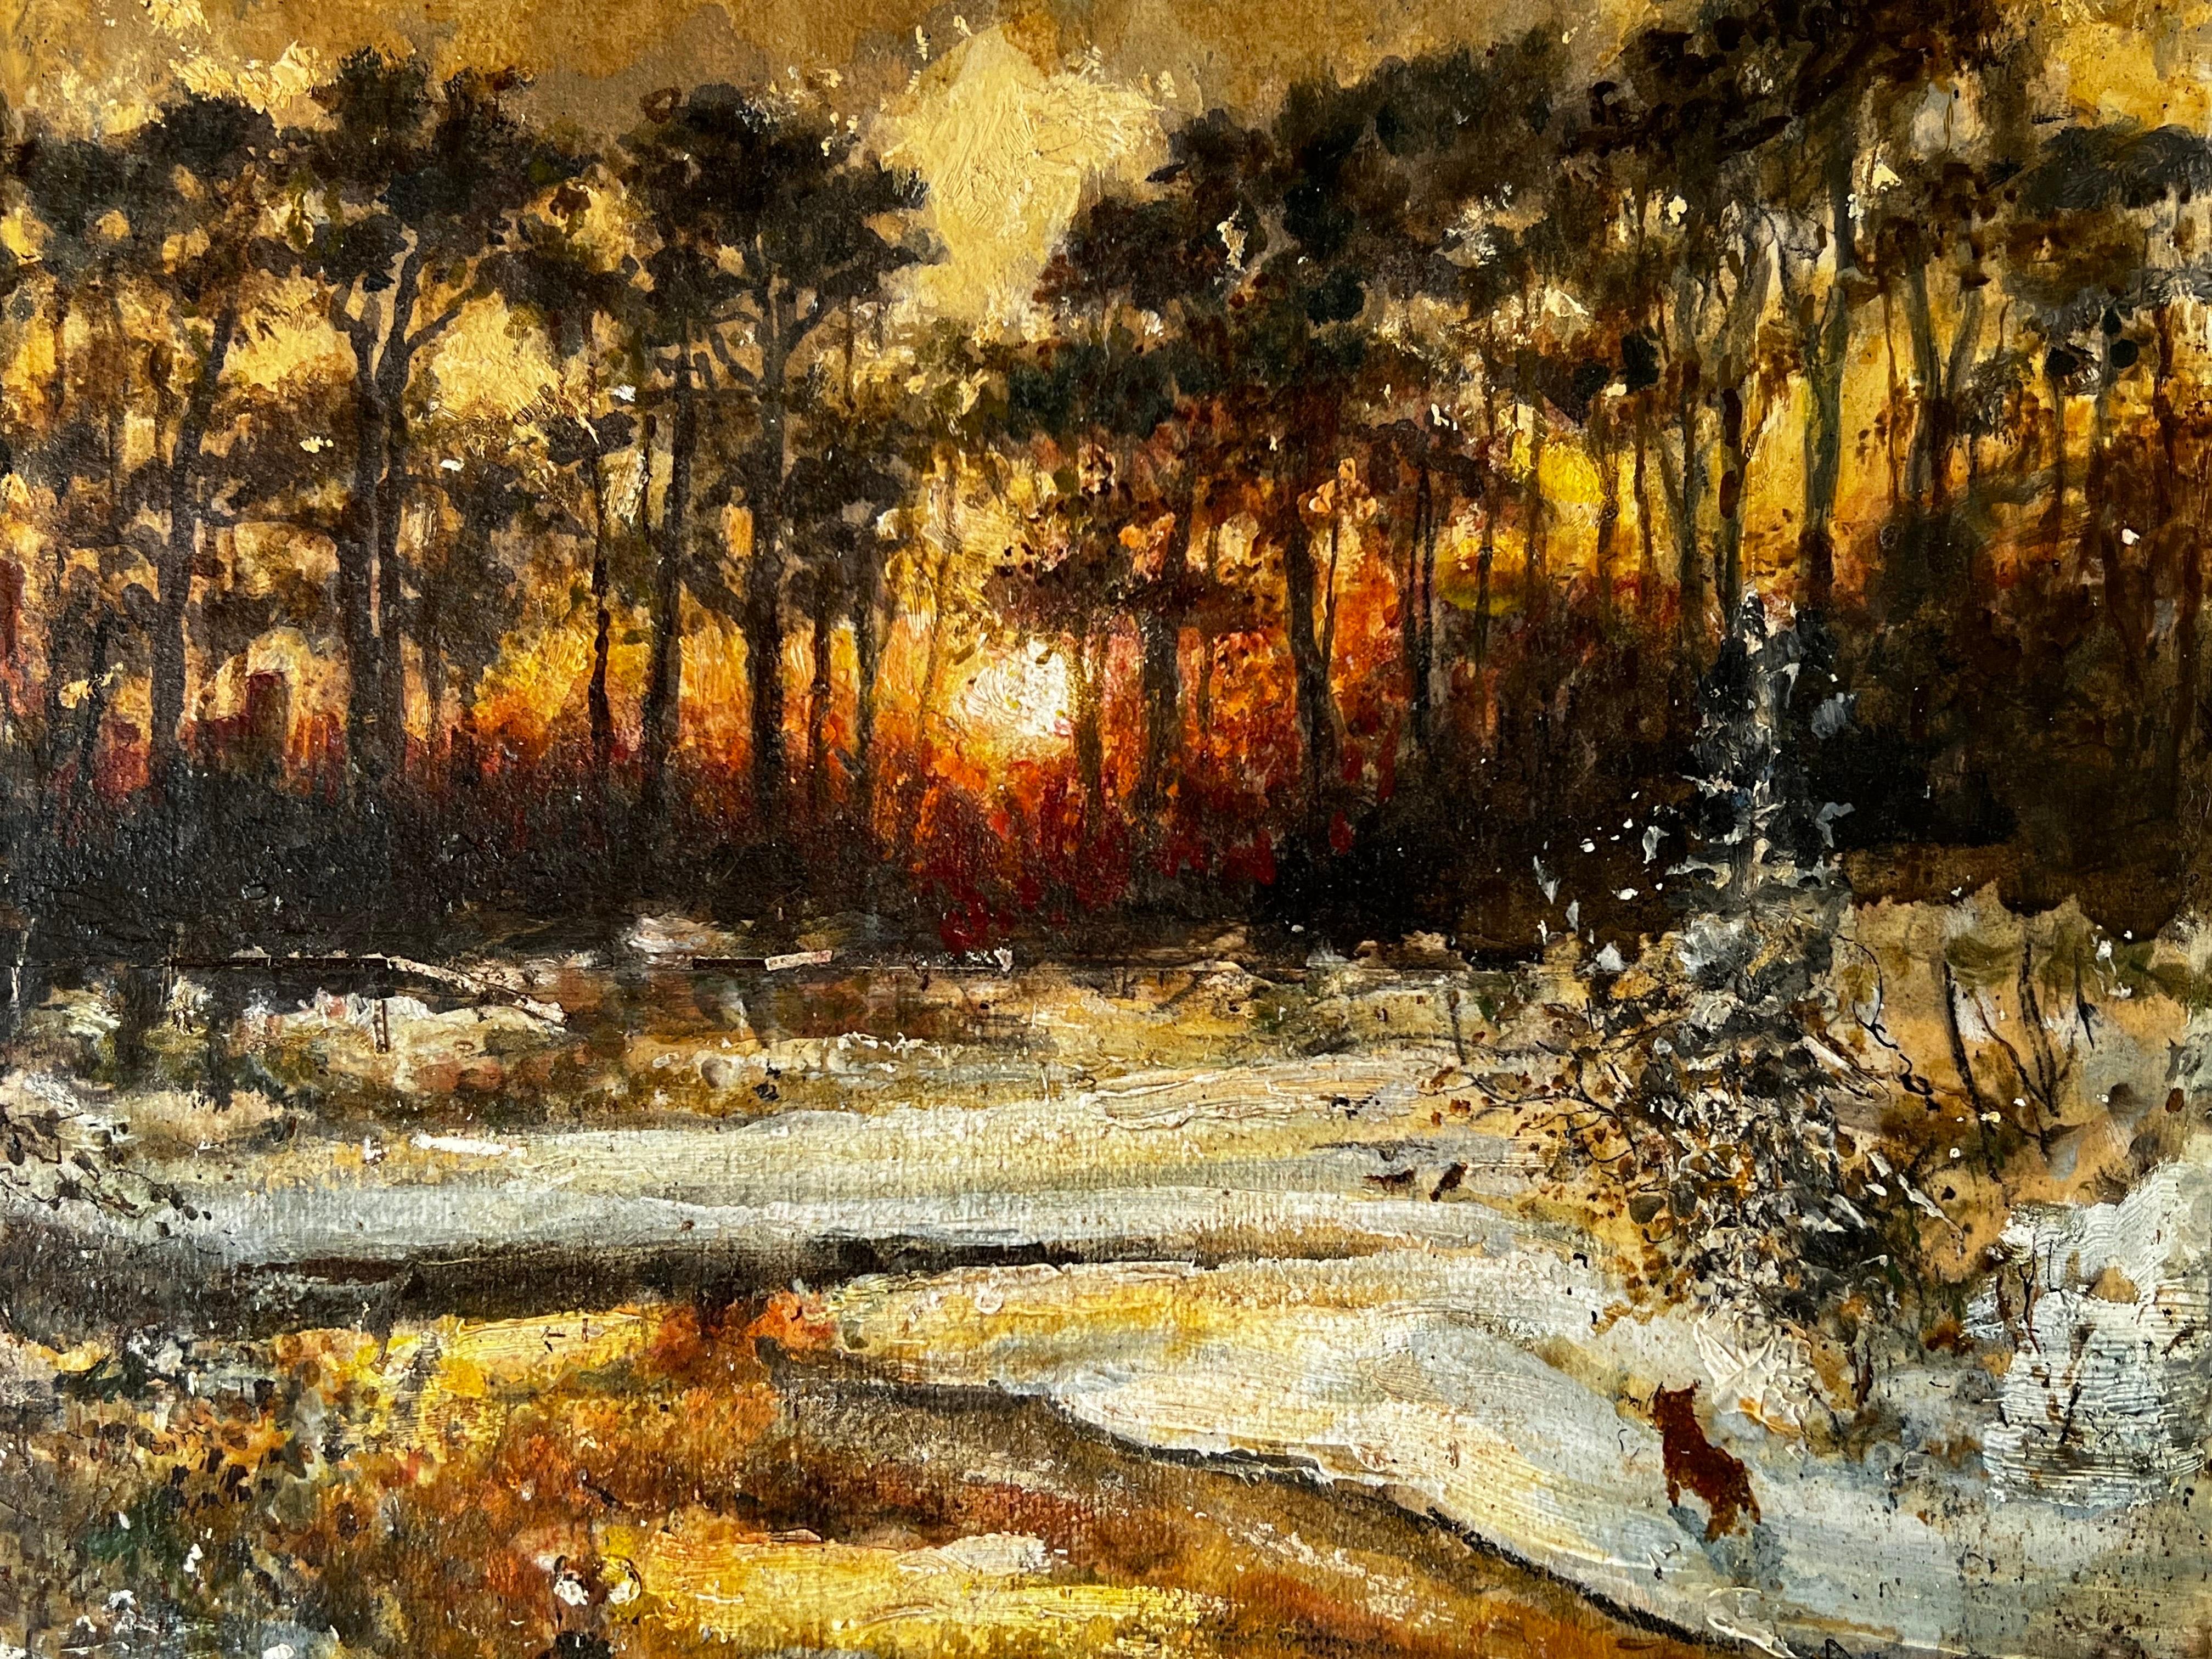 Snowy Woodland Sun Rise With Observant An Small Fox  - Painting by Norman A Olley